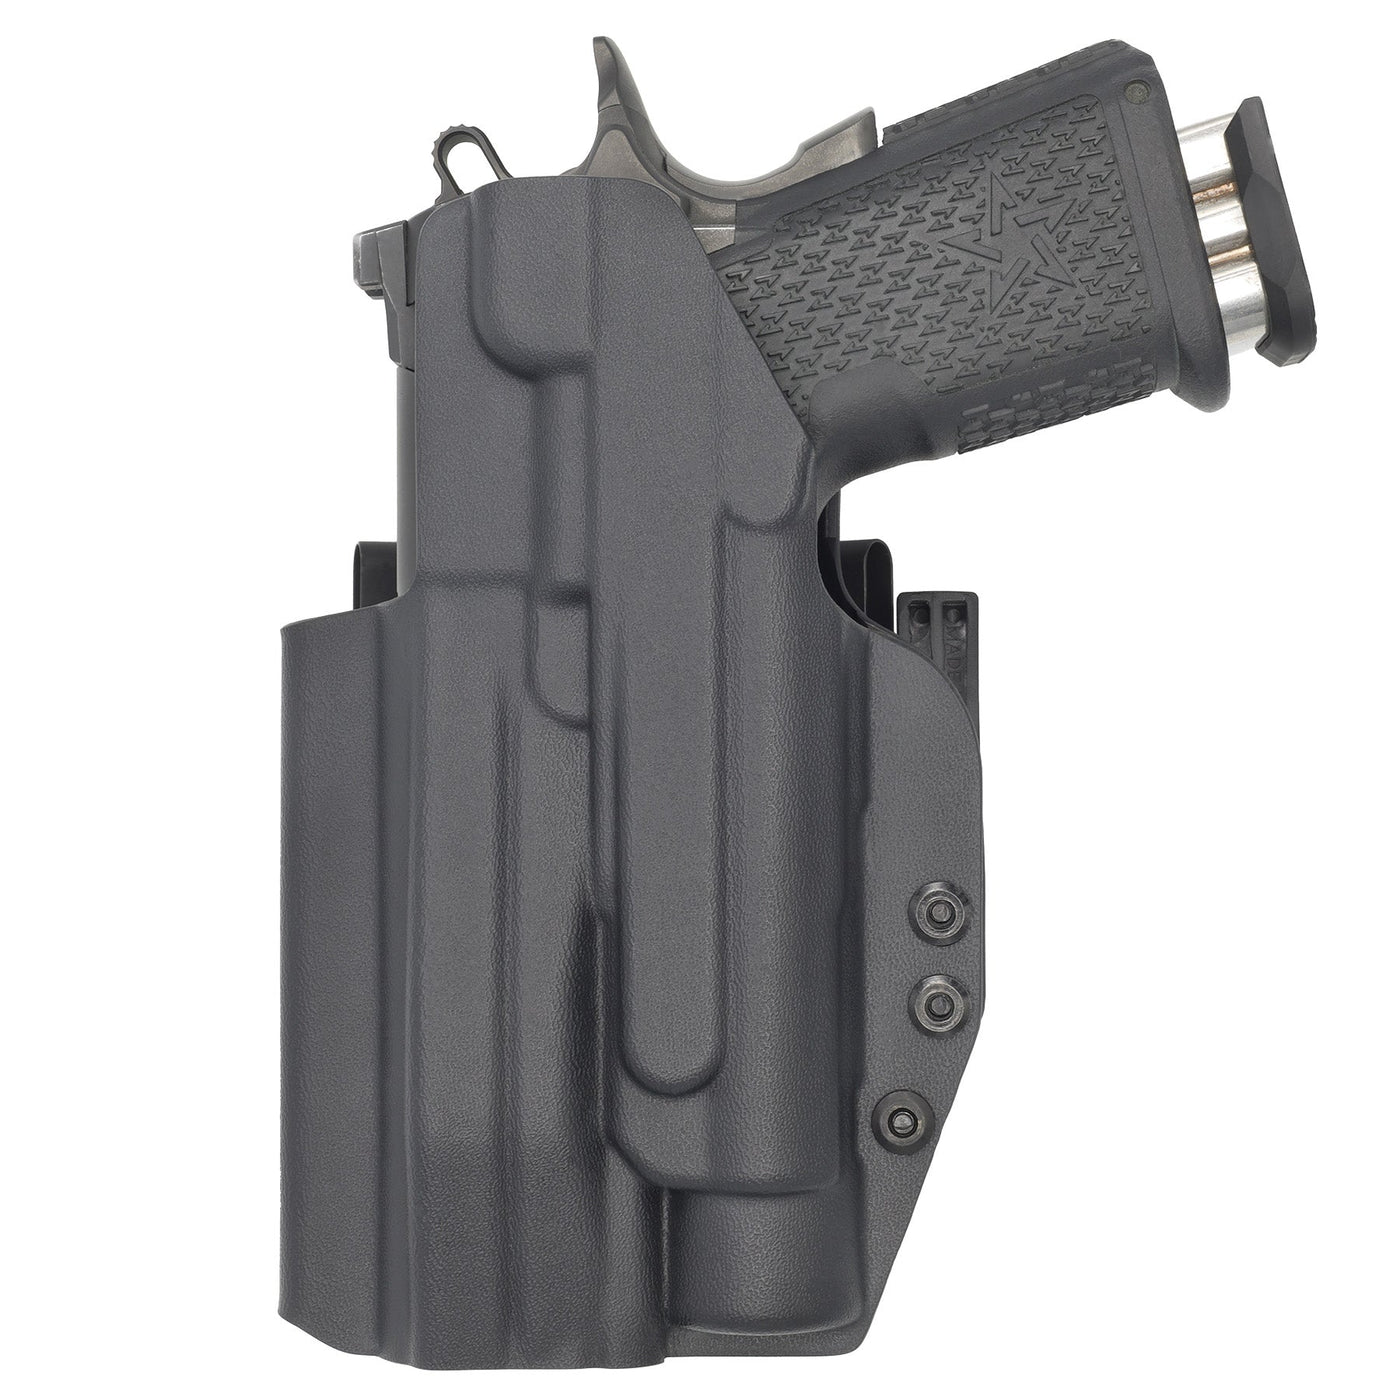 C&G holsters Quickship IWB ALPHA UPGRADE tactical 1911 DS Prodigy Streamlight TLR-1 in holstered position back view